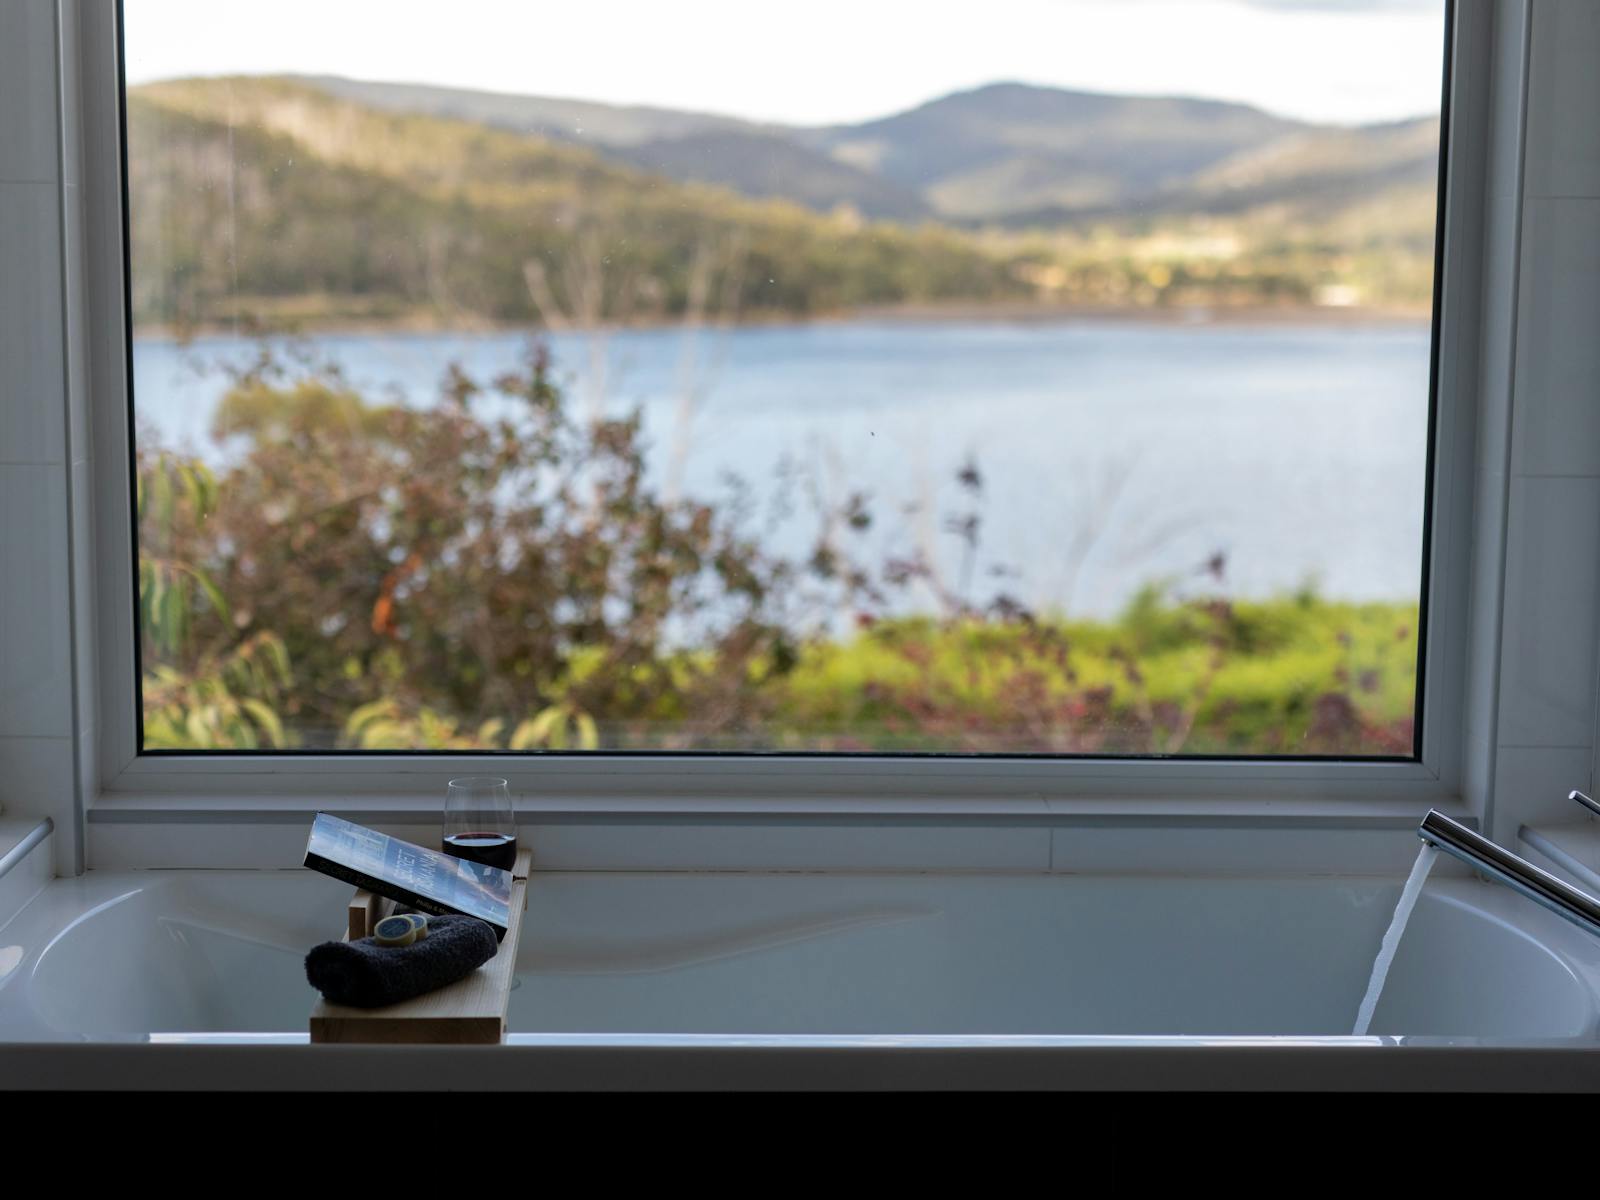 Image of a bath running with a book and a glass of wine with a view of the water in the background